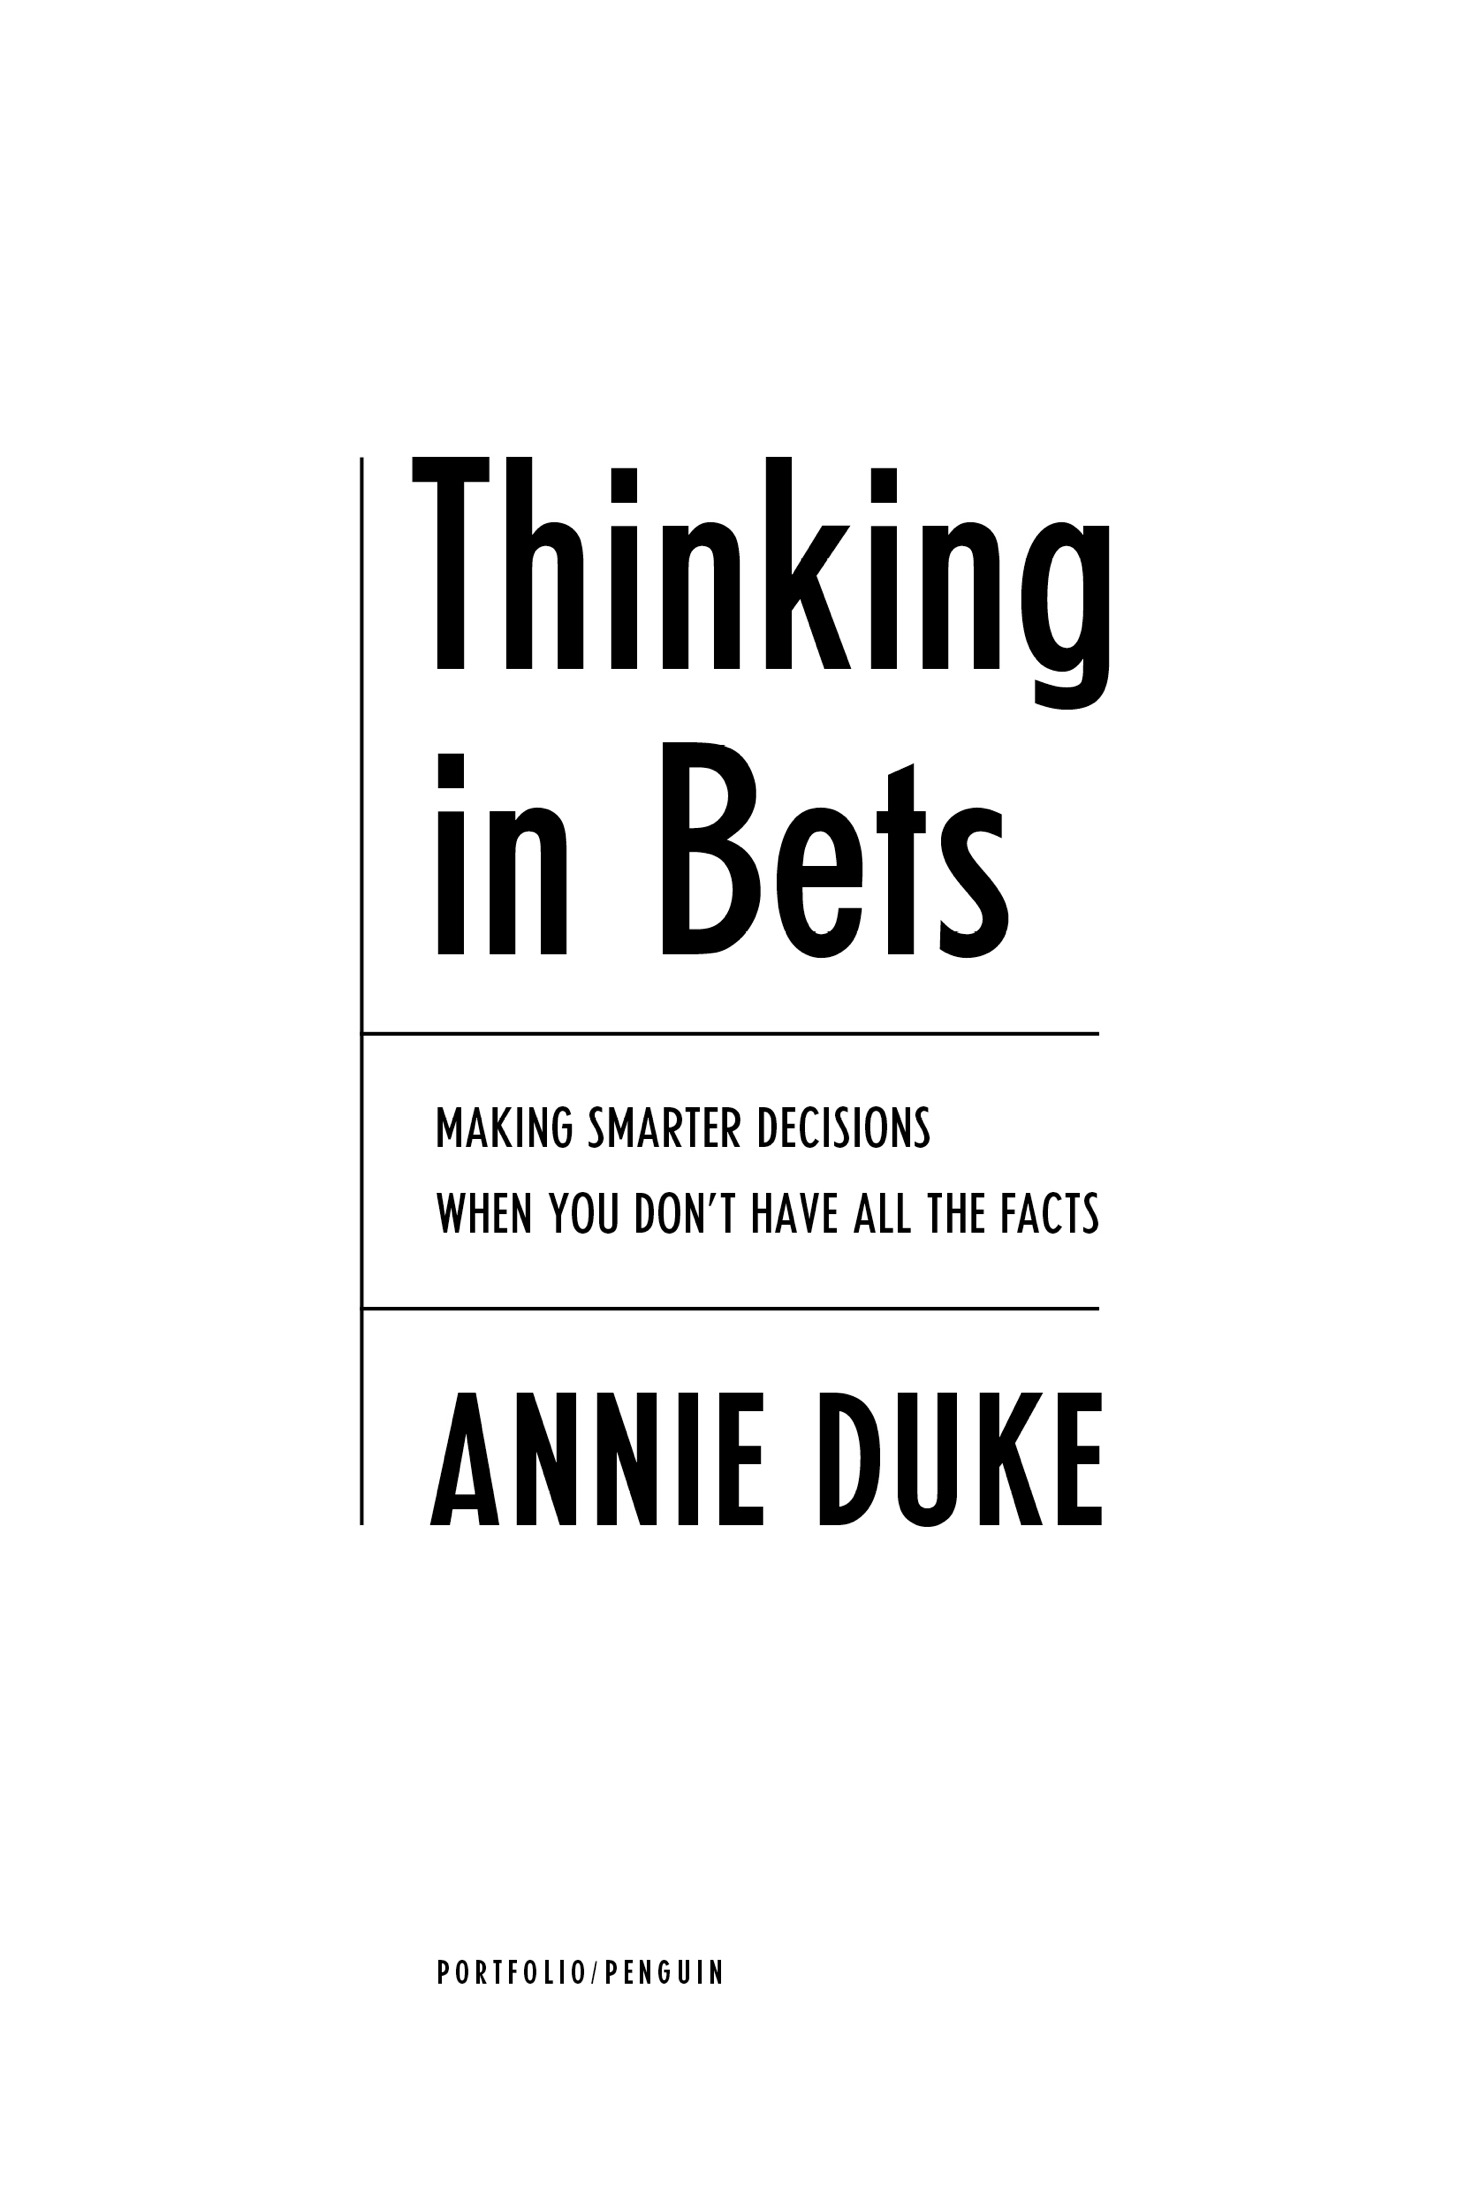 Thinking in bets making smarter decisions when you dont have all the facts - image 2